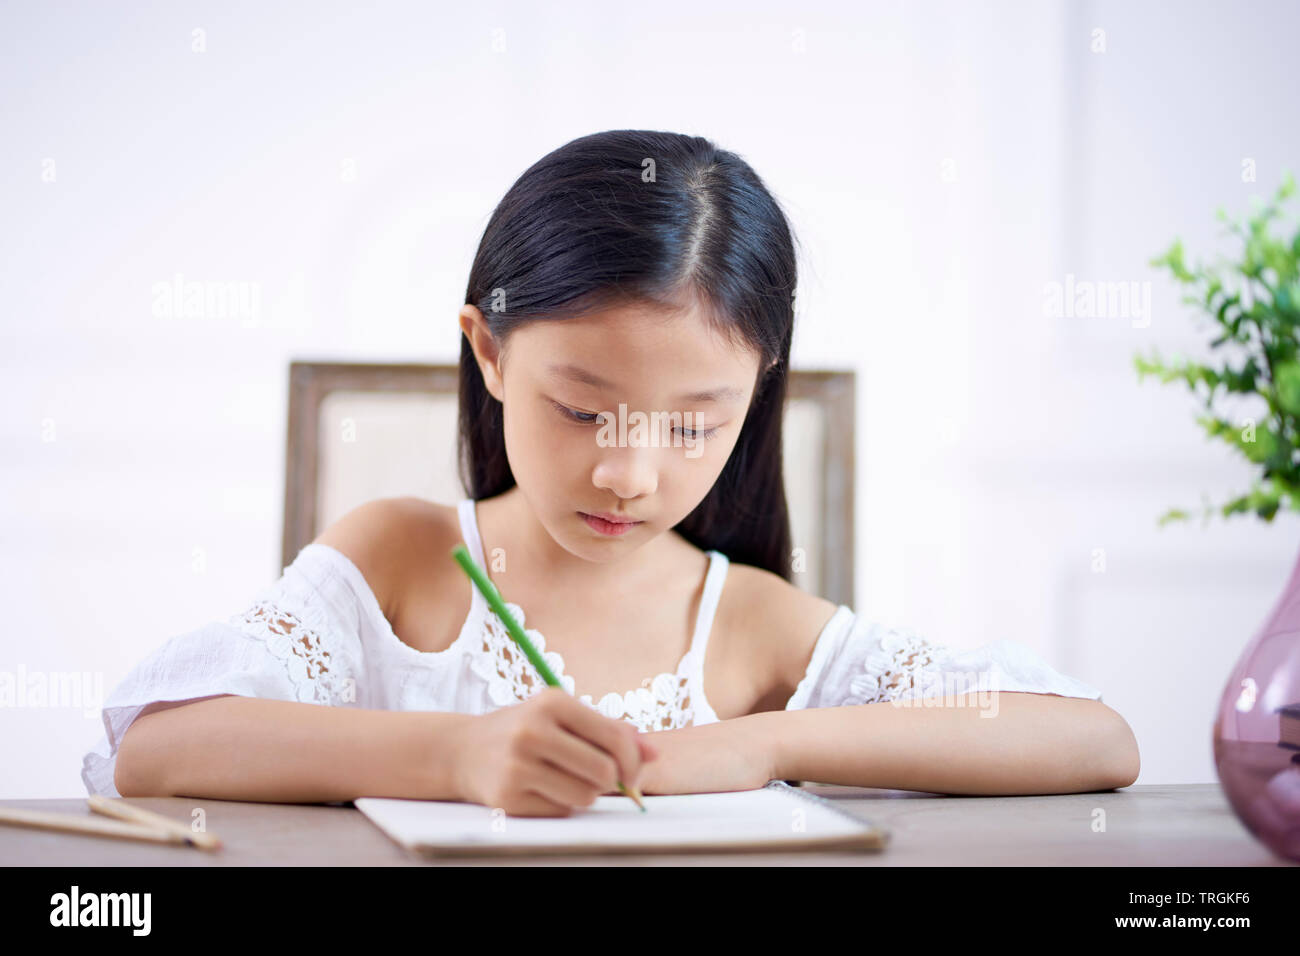 beautiful little asian girl with long black hair sitting at desk in her room writing or drawing on note book Stock Photo